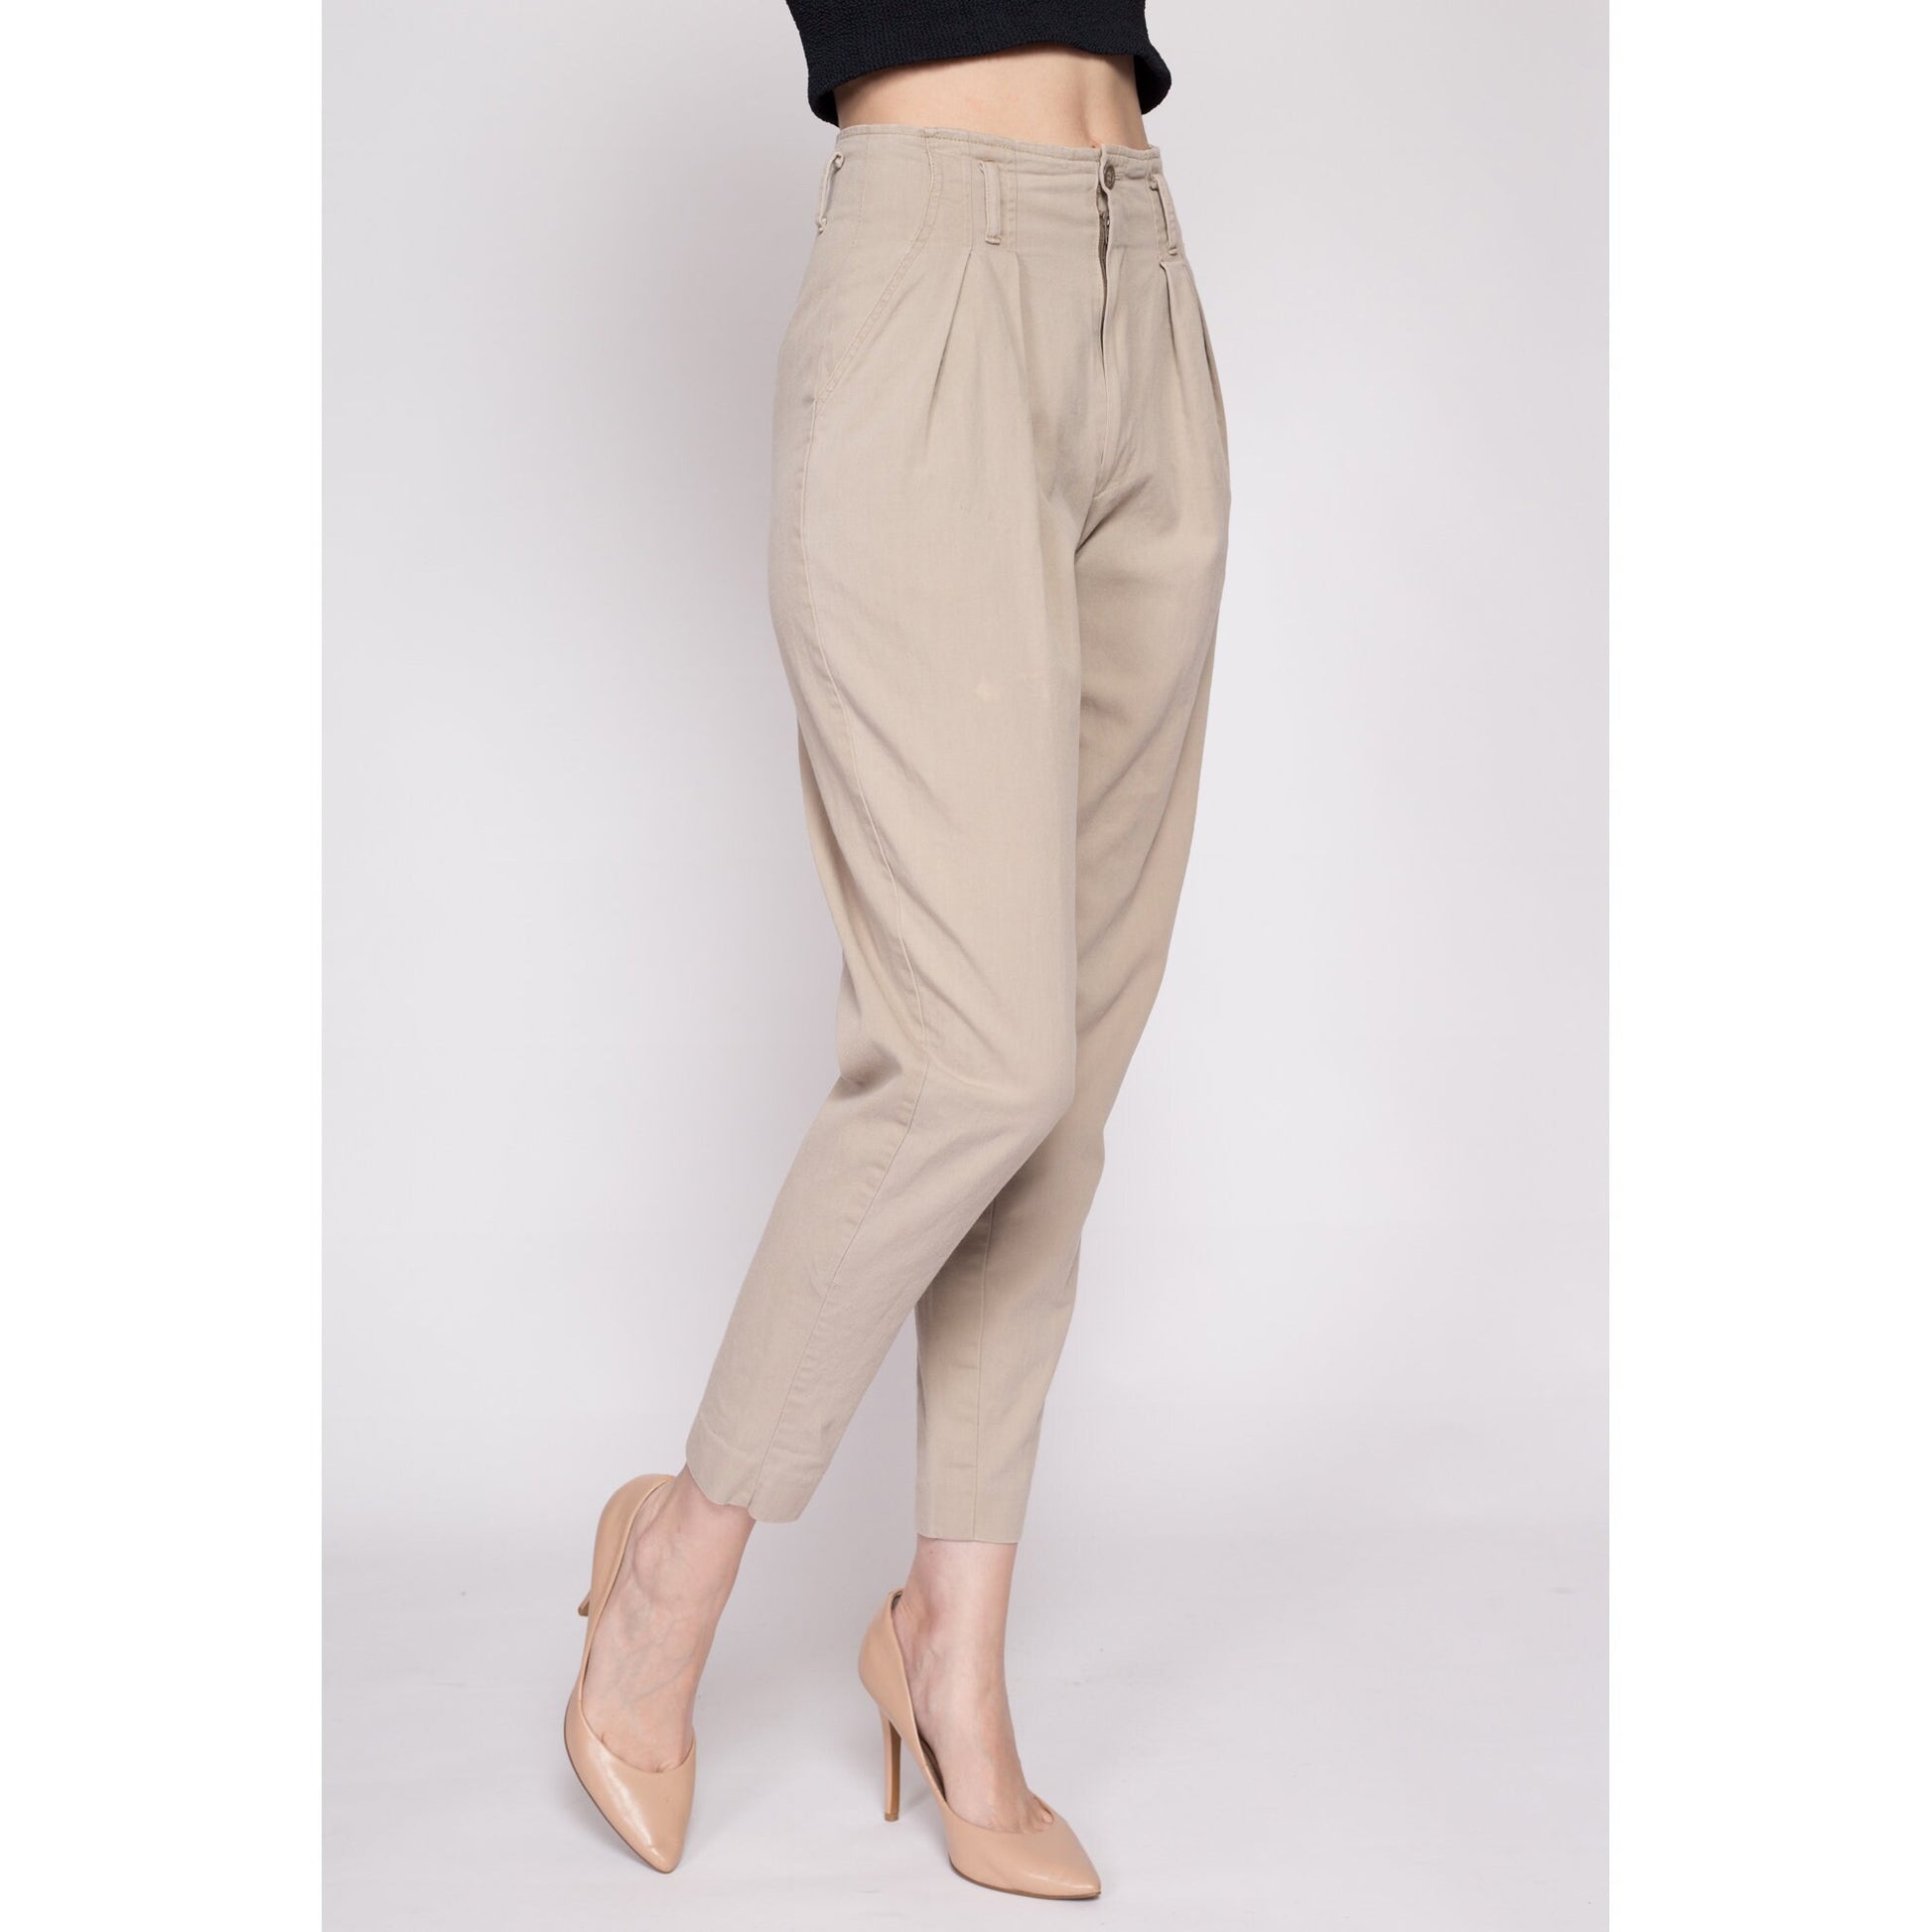 XS| 80s Khaki Cotton High Waisted Pants - Extra Small, 24.5" | Vintage Pleated Tapered Leg Short Inseam Trousers